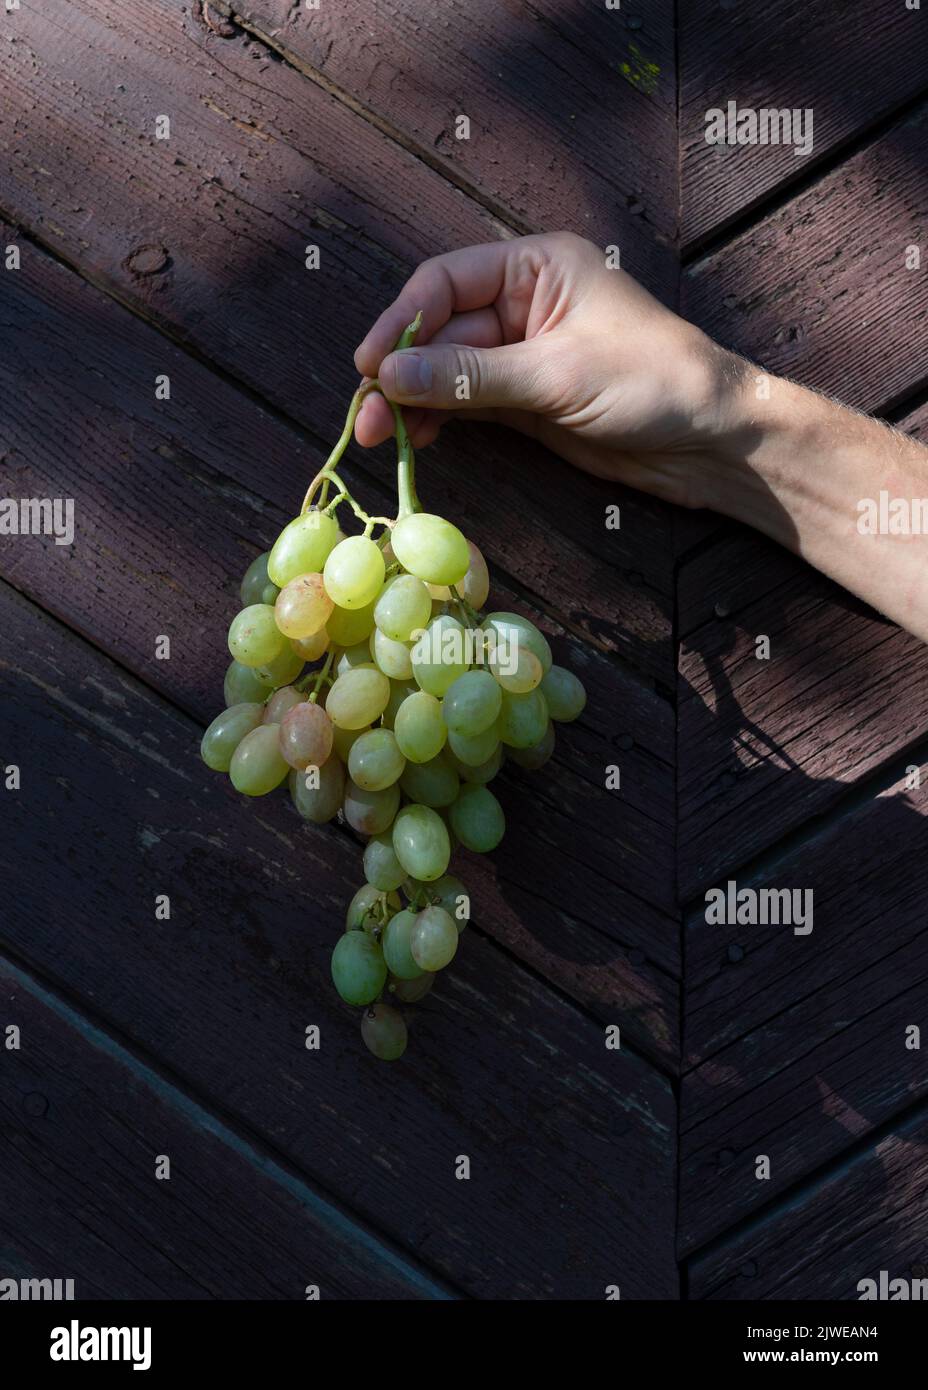 Bunch of green grapes in a hand on a dark background Stock Photo